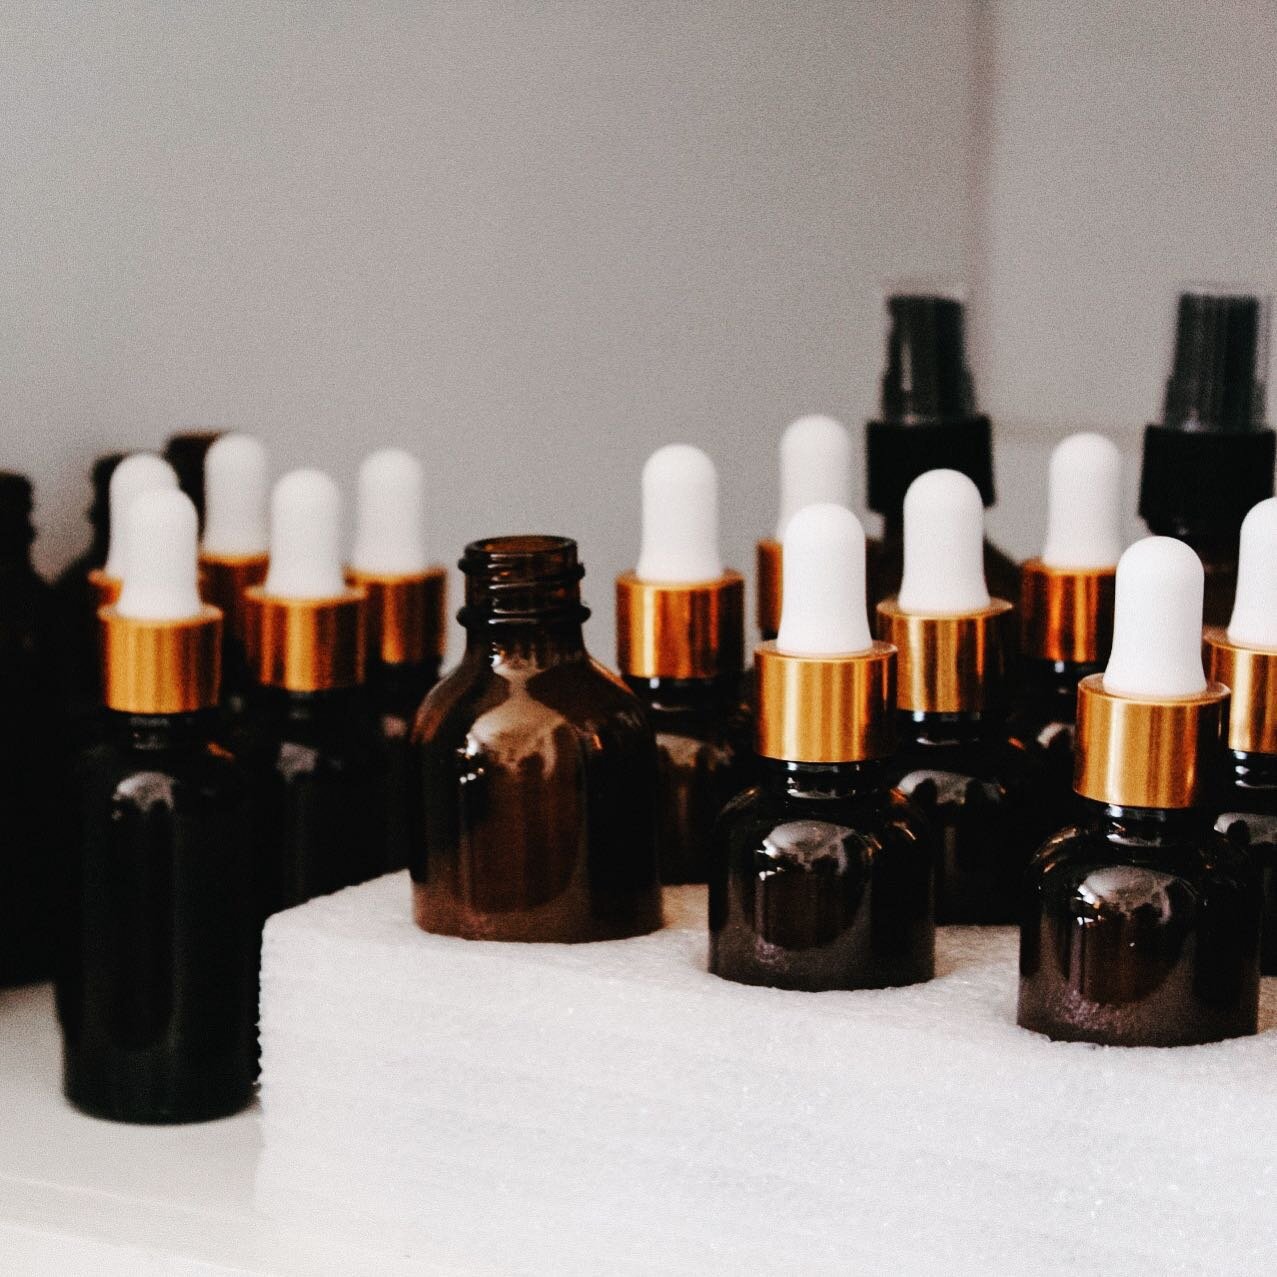 Blending oils can be confusing! So many opinions and methods and no clear starting place...

There are four main methods of blending that I&rsquo;ve come across and used over the past 7 years.

&bull; blending for fragrance
&bull; blending based on c